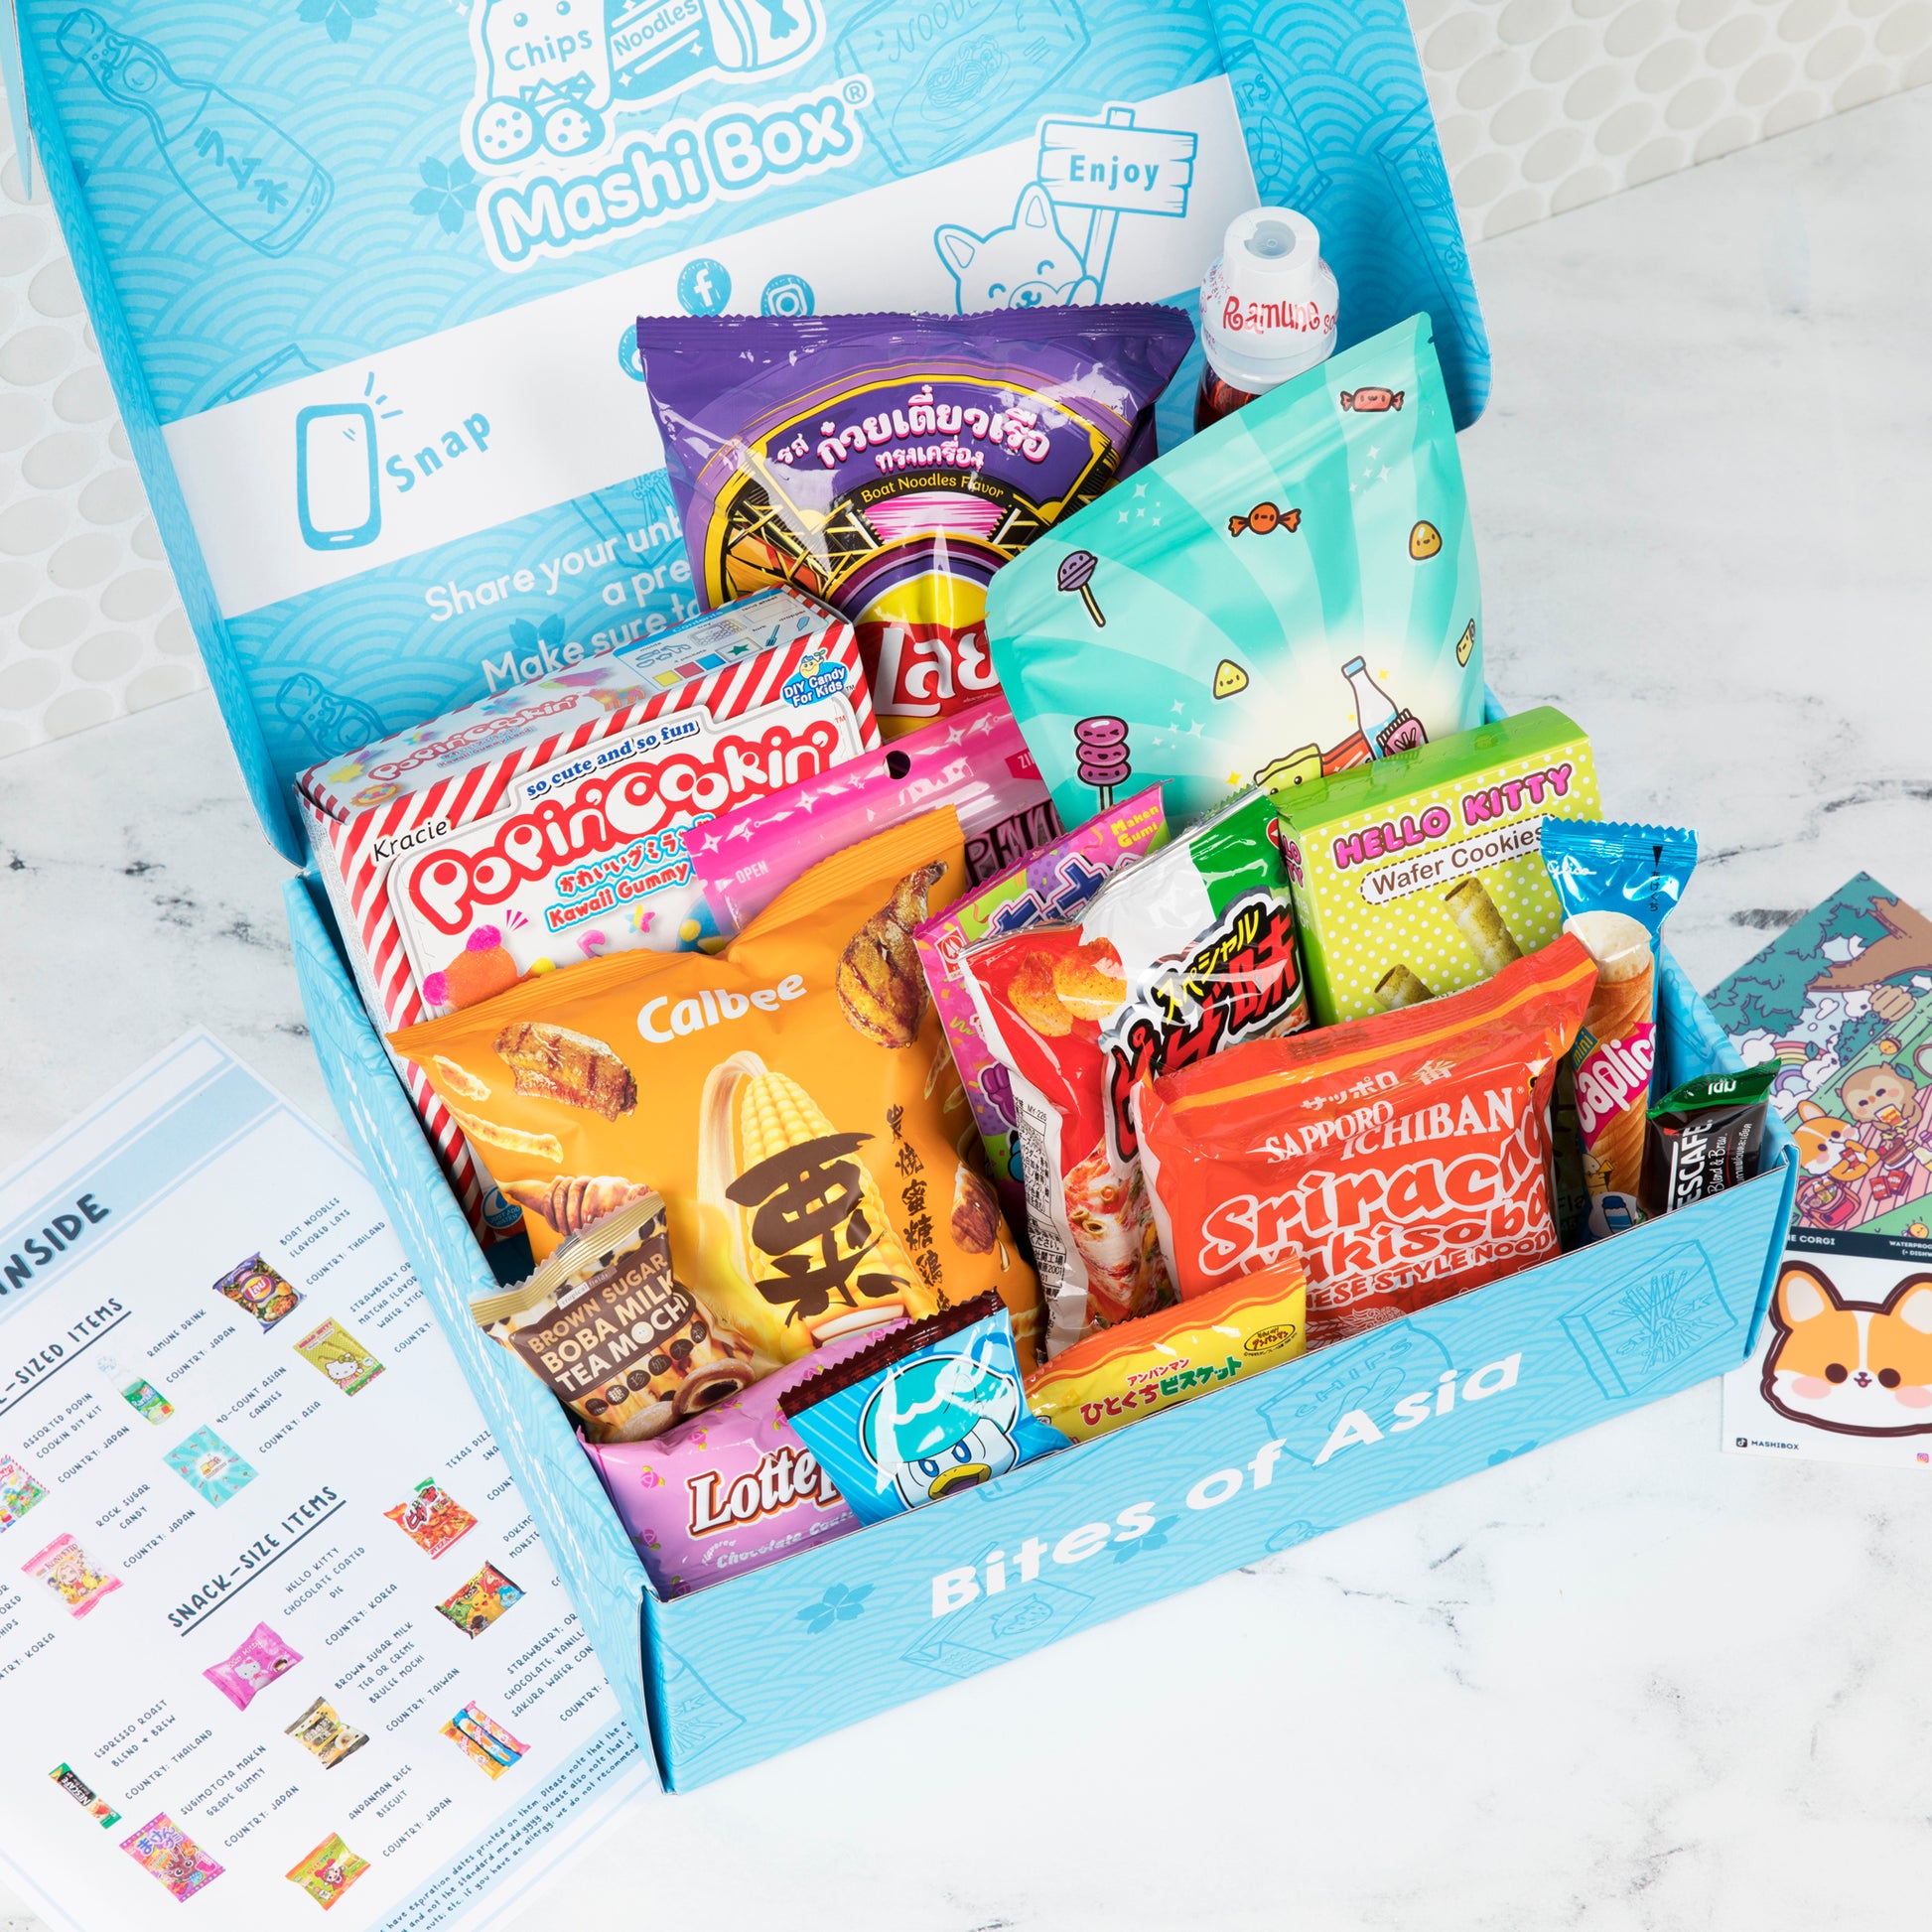 Mashi Box Asian Mystery Mini Snack Box - 18 Items - Includes 1 Full Sized  Item with Snack Variety from Japan, Korea, China, Vietnam, Indonesia, etc